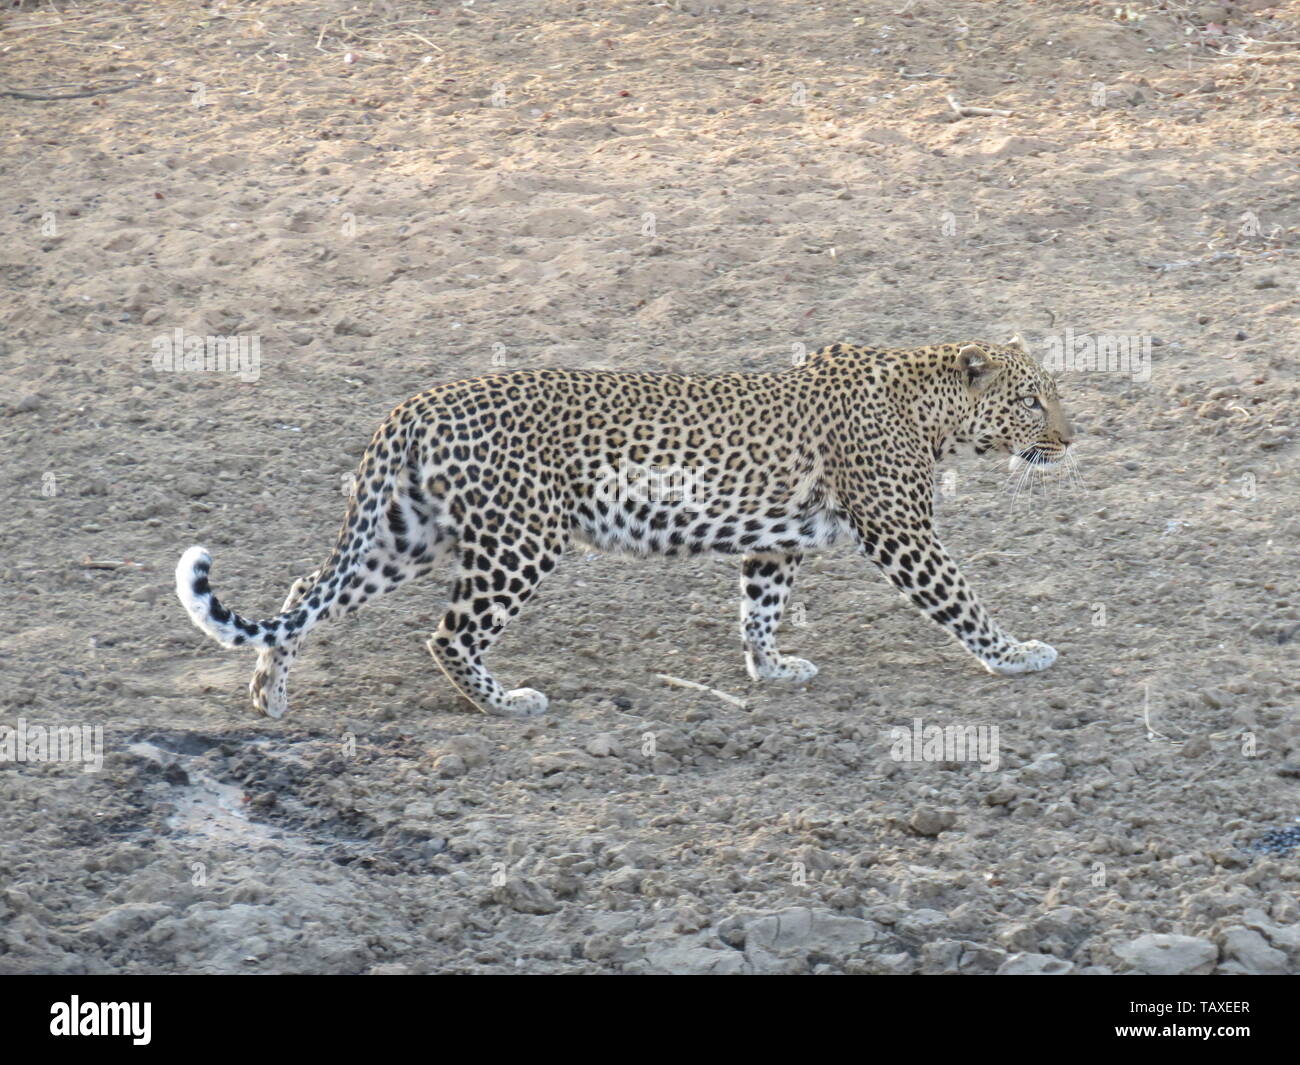 A beautiful African leopard on the move showing power and grace, Karongwe Game Reserve, Kruger National Park, South Africa. Stock Photo